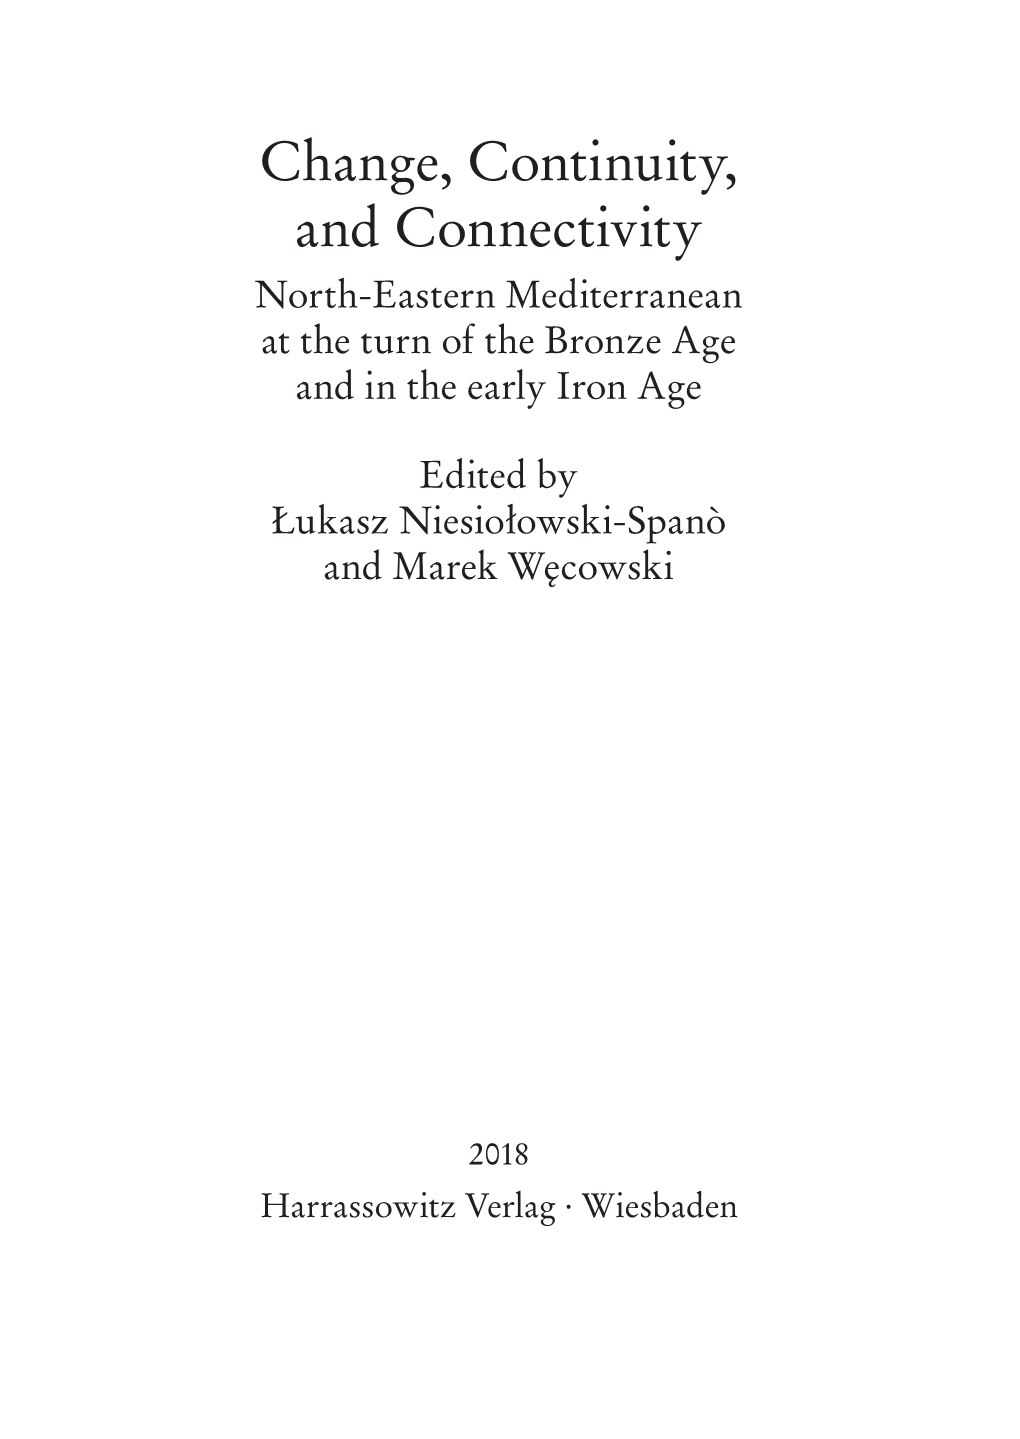 Change, Continuity, and Connectivity North-Eastern Mediterranean at the Turn of the Bronze Age and in the Early Iron Age